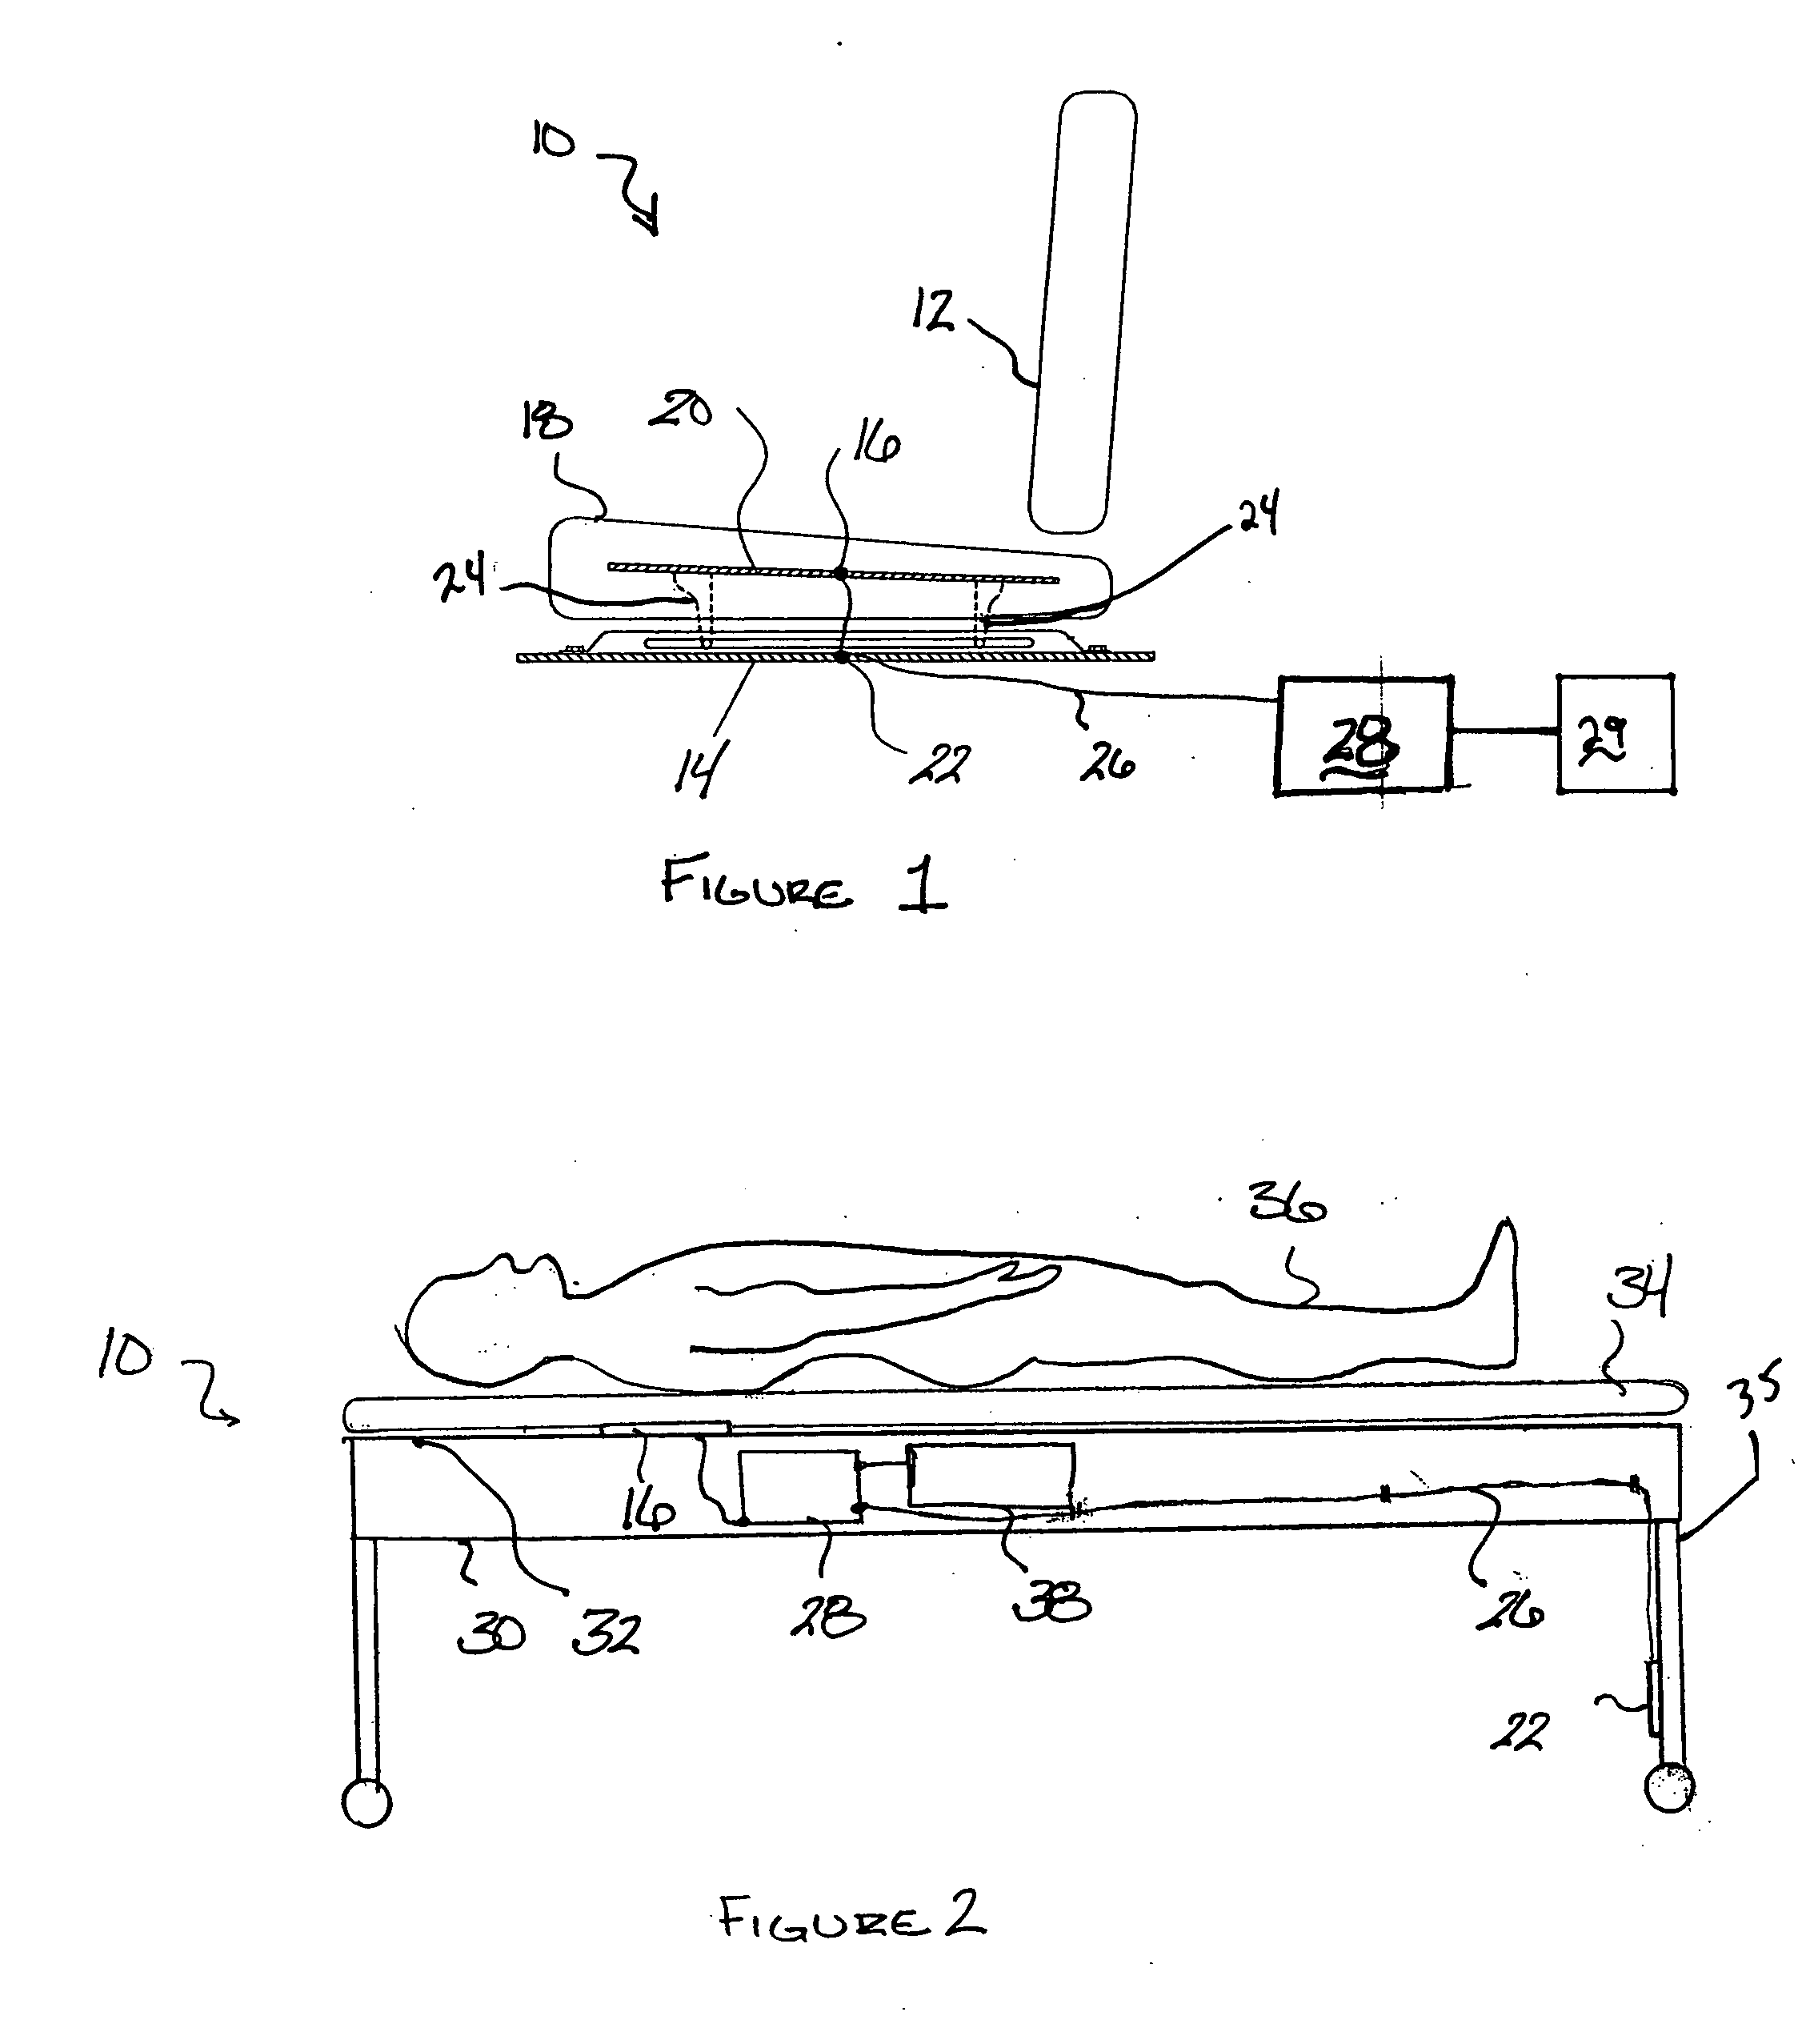 Occupant heartbeat detection and monitoring system